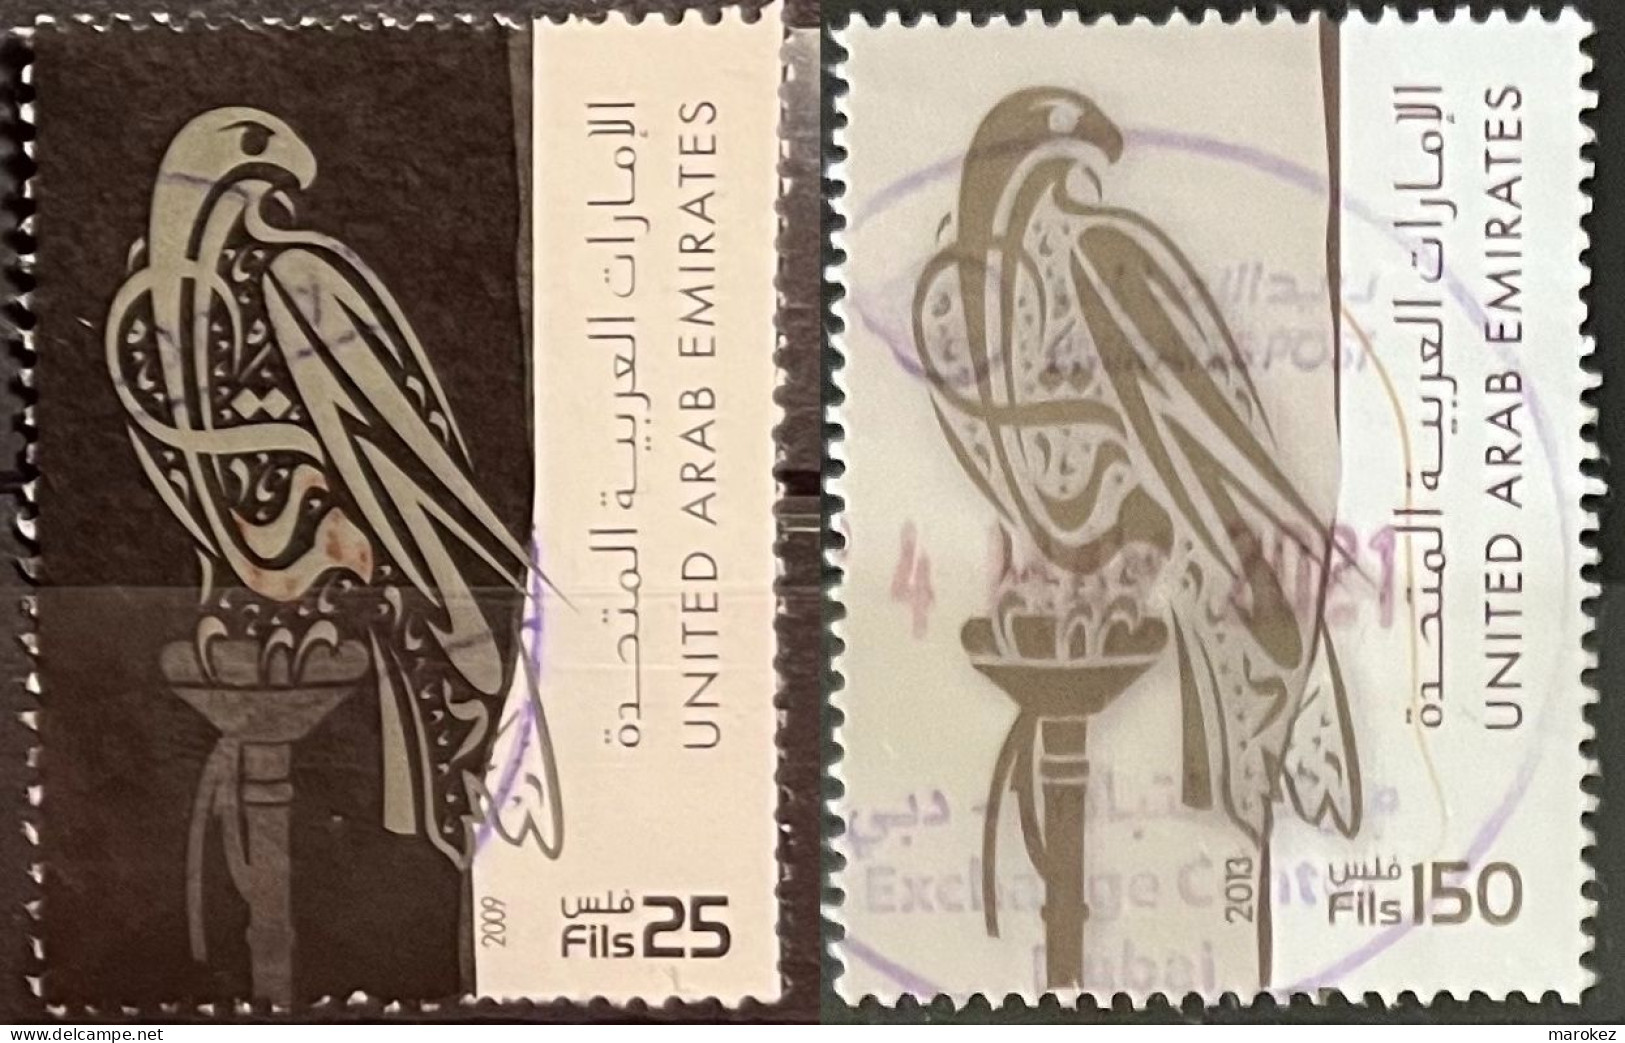 UAE 2009-2013 Definitives - Falcon 2 Postally Used Stamps MICHEL # 969A,1107 - Emirats Arabes Unis (Général)